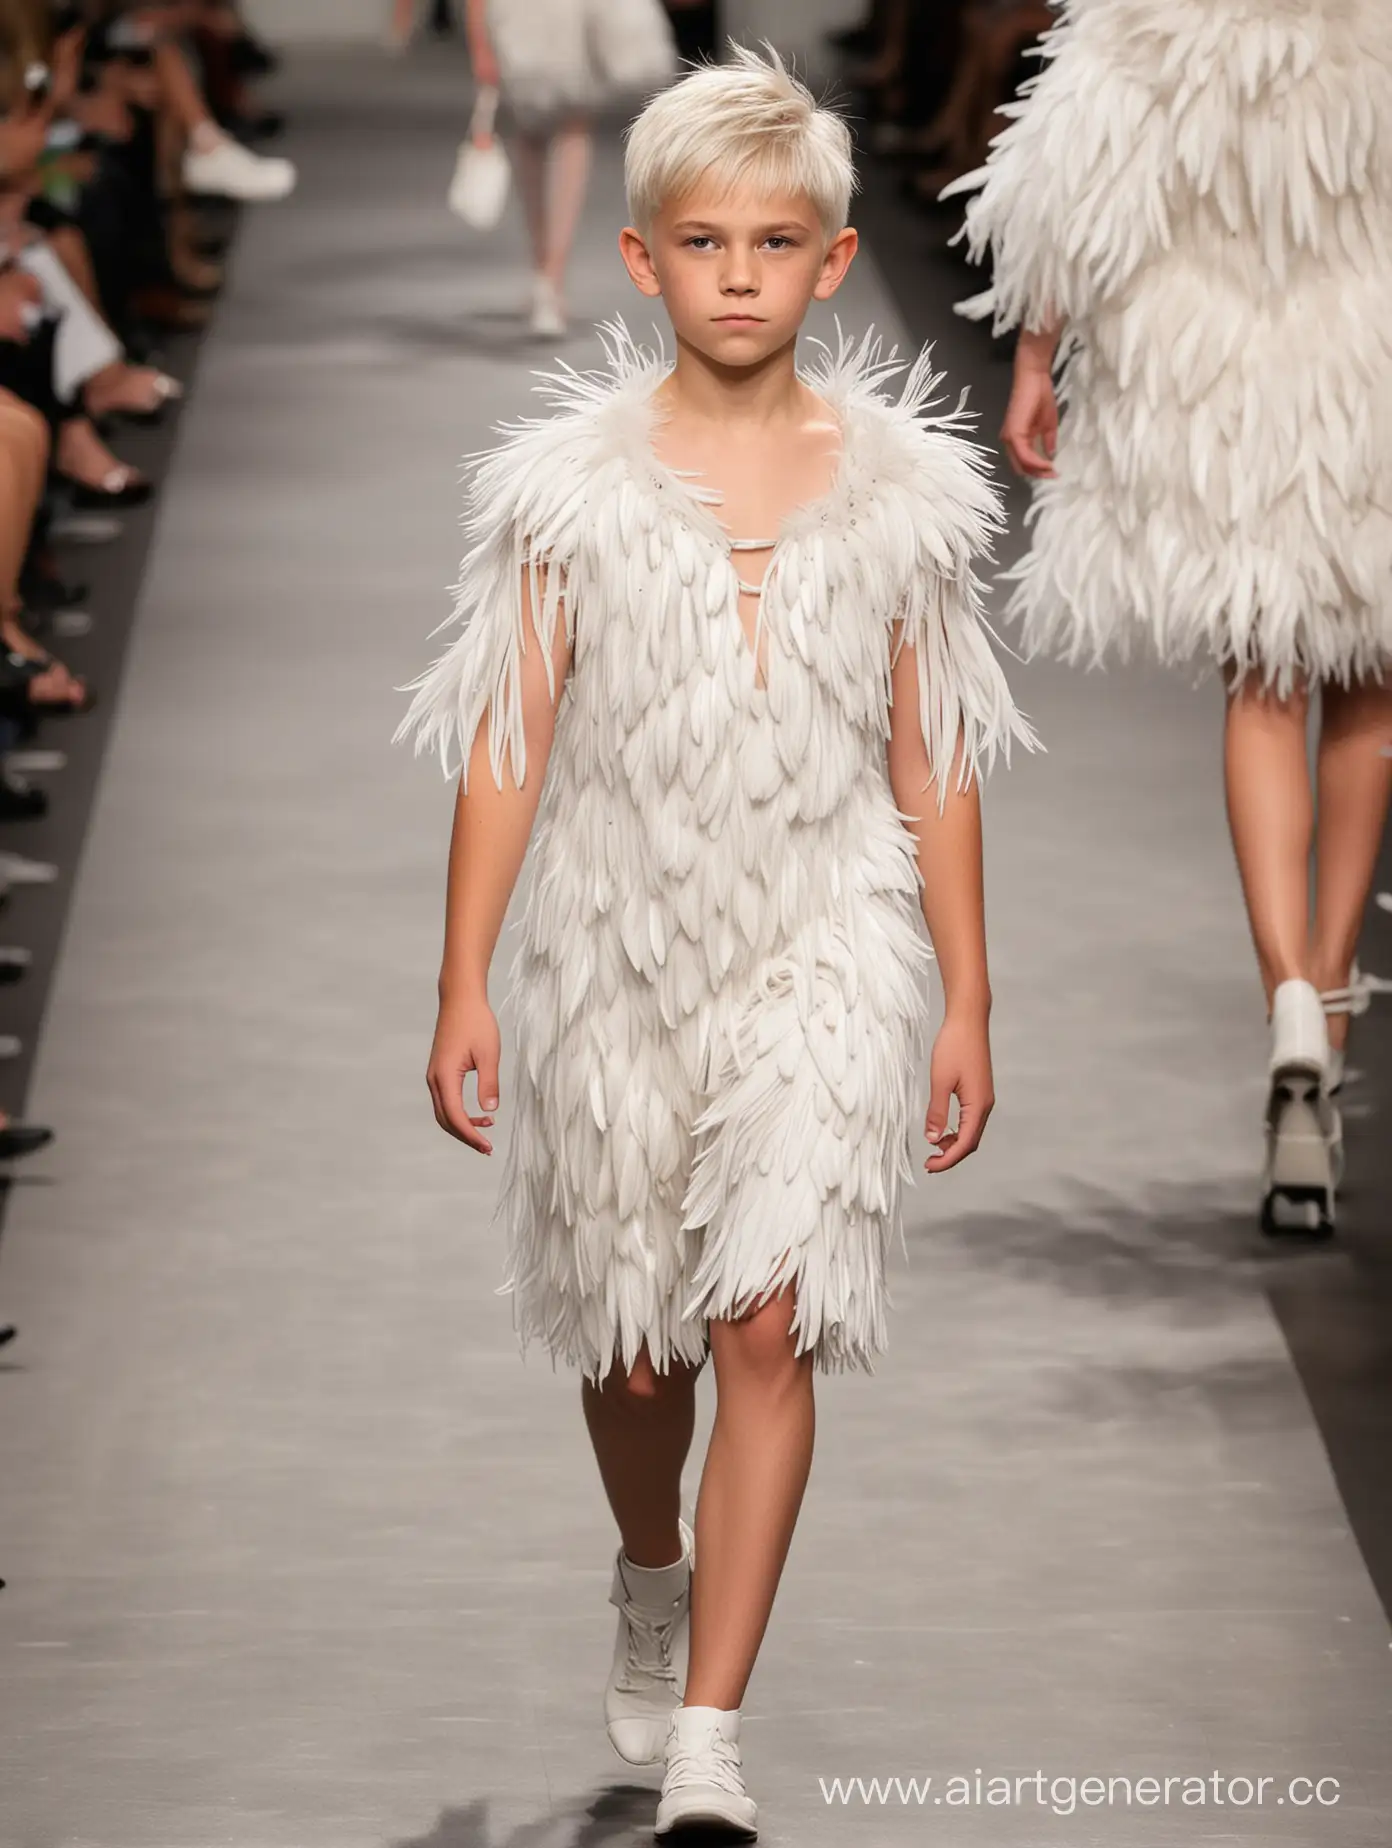 Boy-in-Feathered-Dress-with-White-Hair-Strutting-on-Catwalk